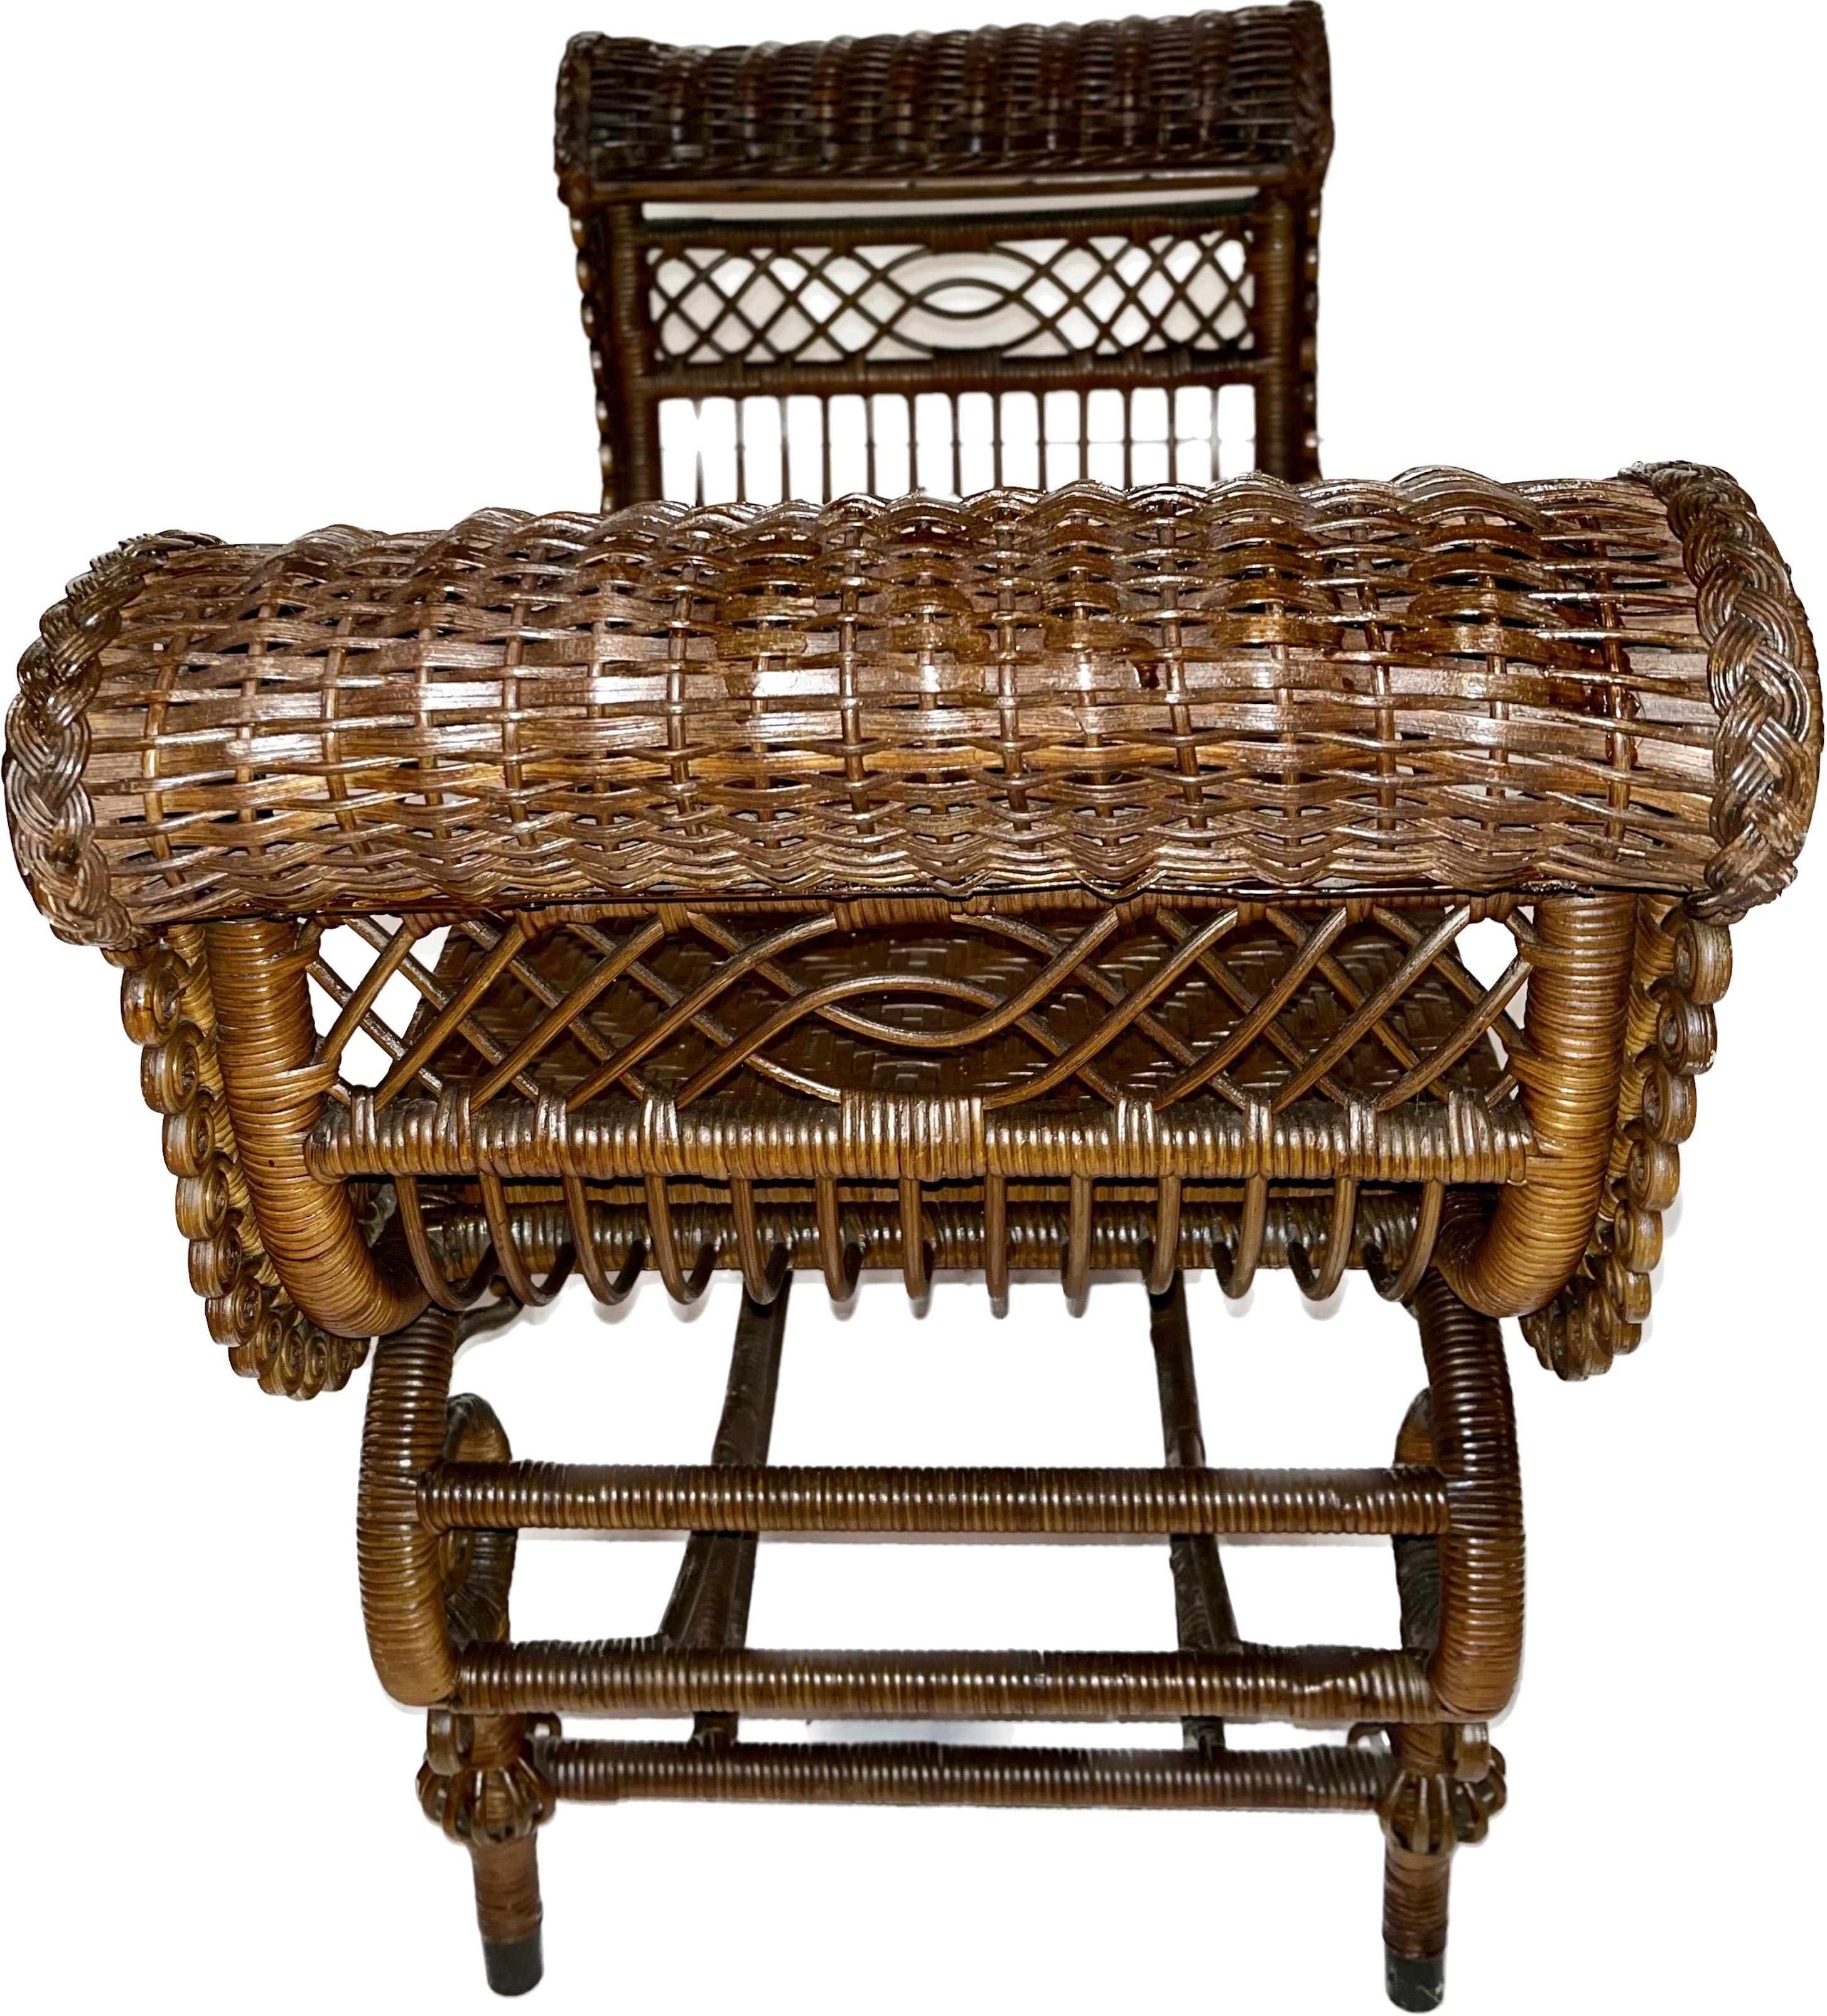 Victorian Elaborately Decorated Antique Wicker Turkish Bench in Natural Finish For Sale